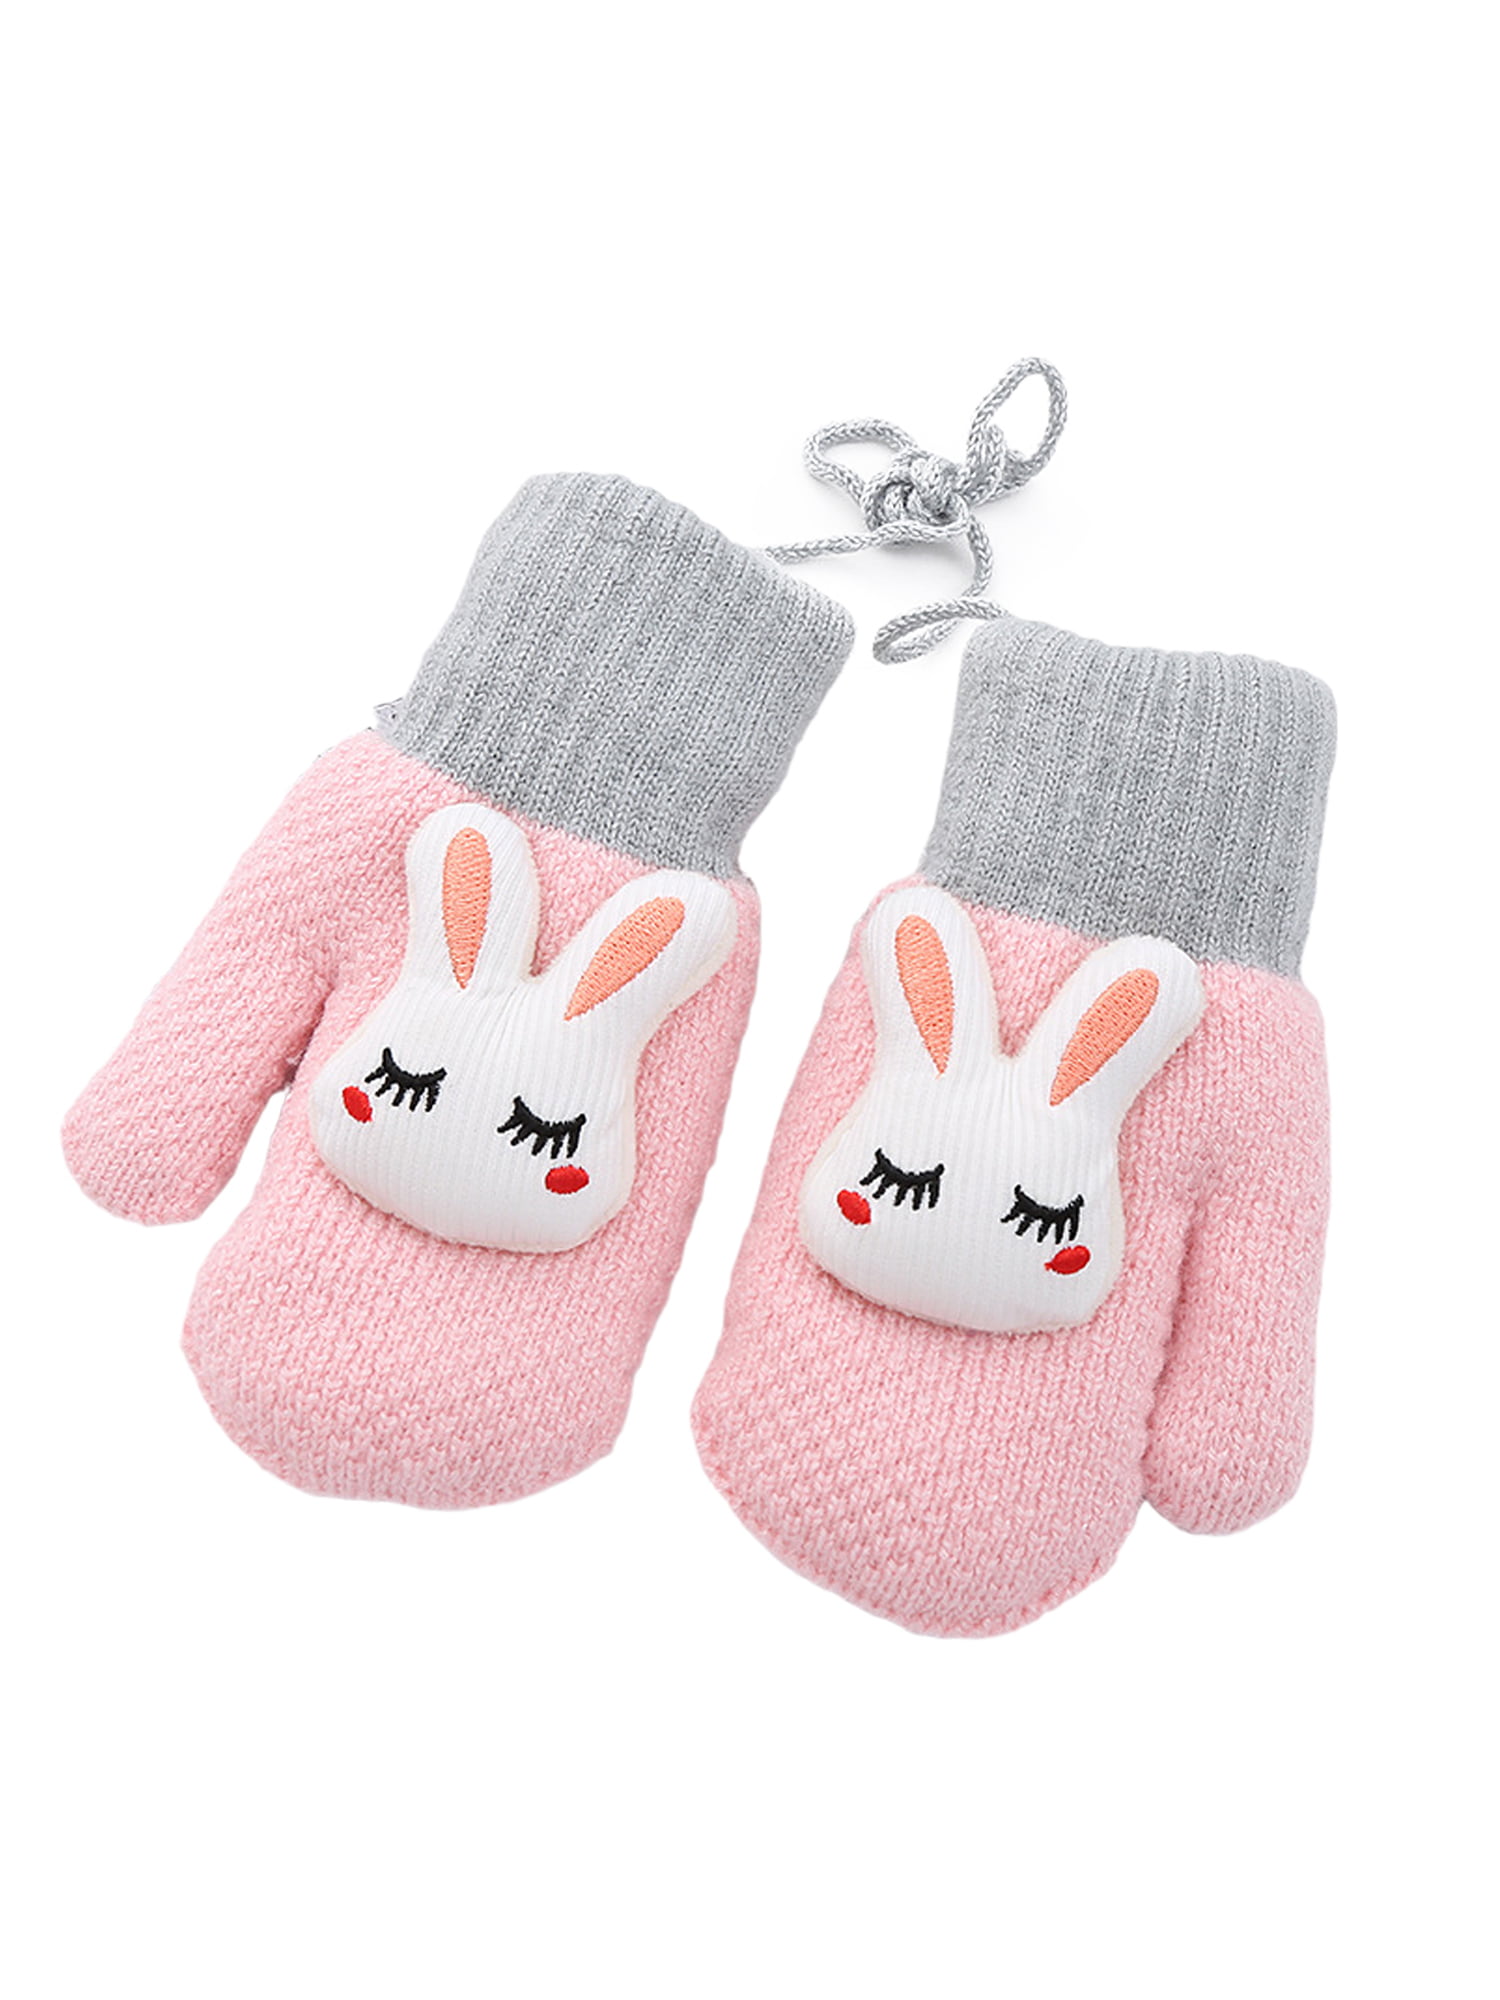 Warm Kids Fleece lined Mittens Soft Winter Knitted Gloves Cute Rabbit Full Finger Stretchy for Toddlers